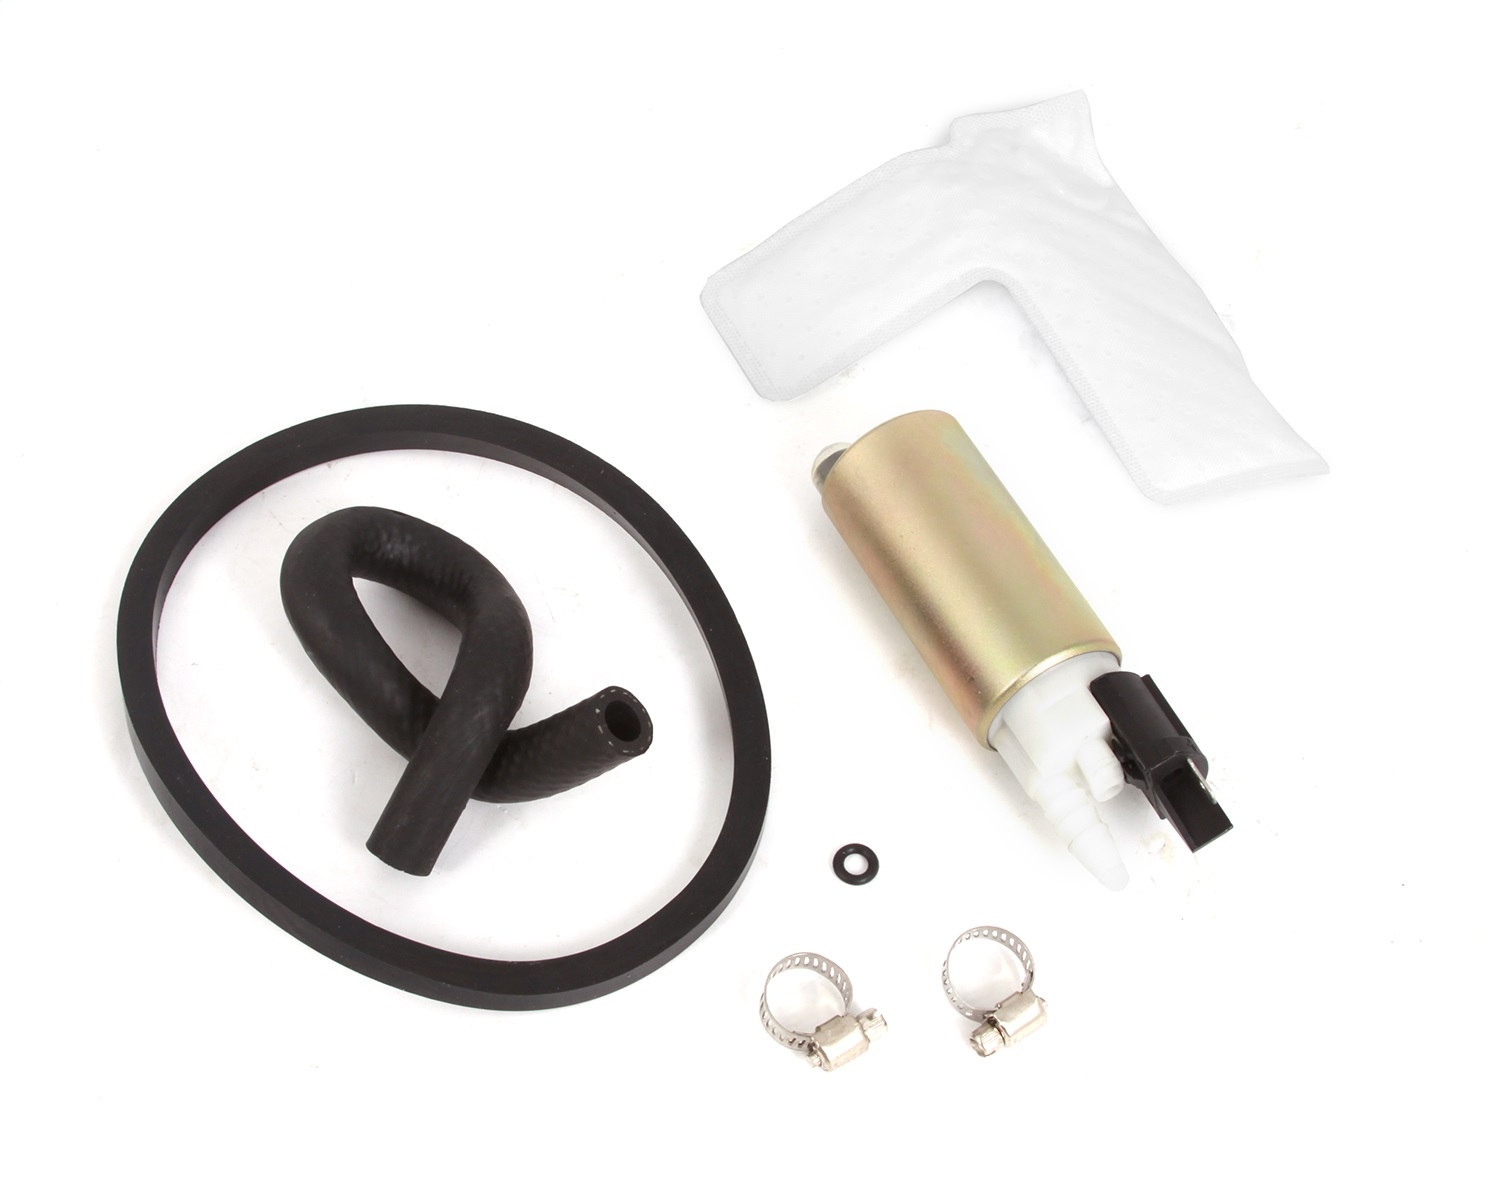 Omix Replacement Fuel Pump For 2005-2007 Jeep Liberty Kj With 2.4L Or 3.7L By Omix, BKGF-17709.34